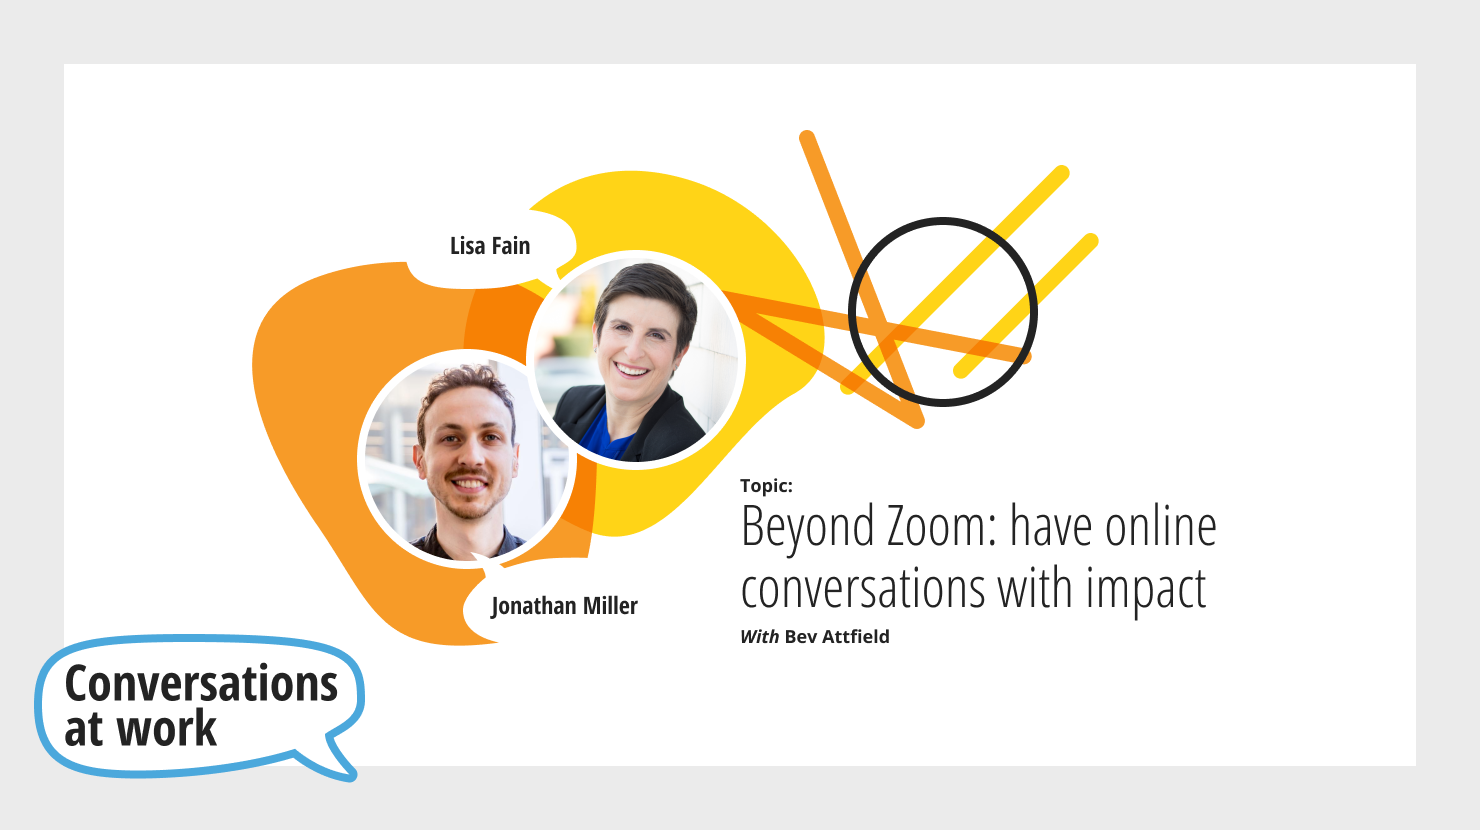 Beyond Zoom: have online conversations with impact